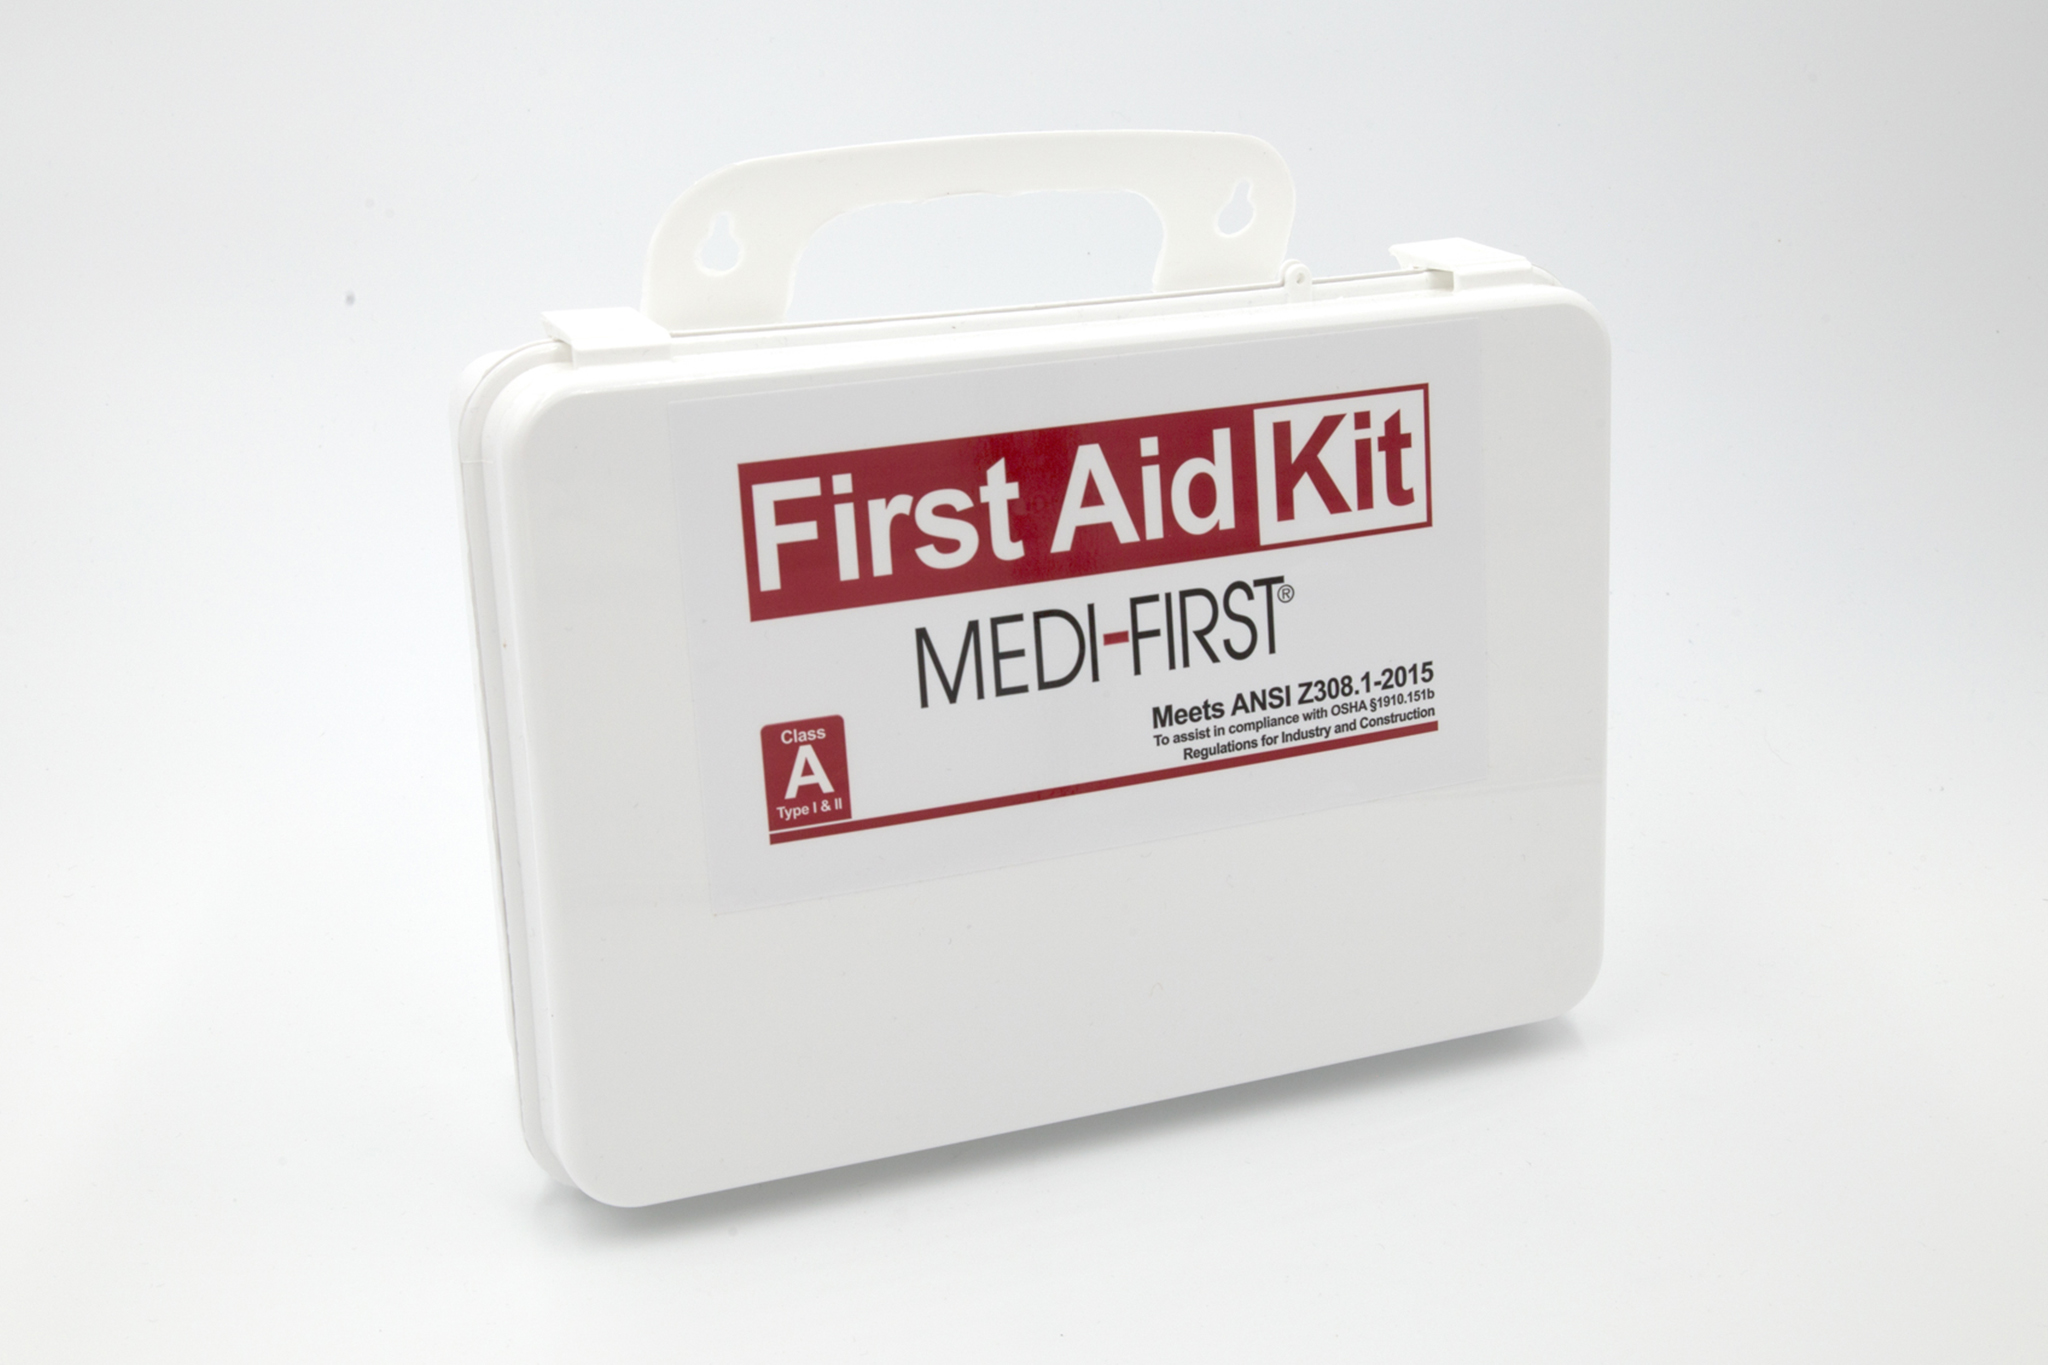 White first aid kit with red text